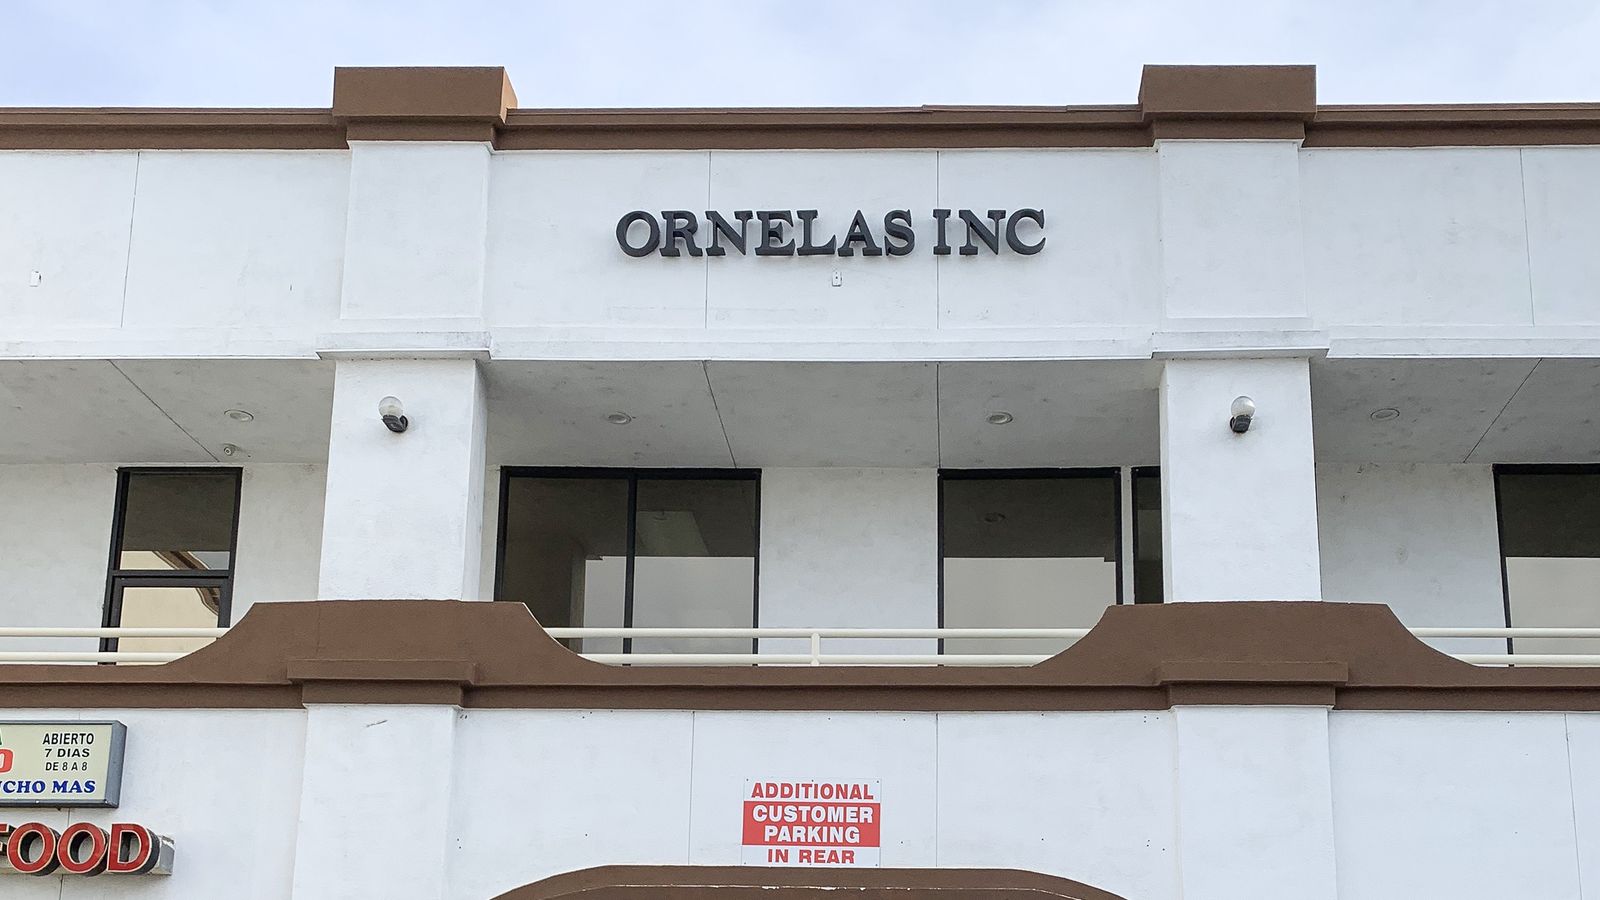 Ornelas Inc 3d metal sign painted in black made of aluminum for outdoor branding